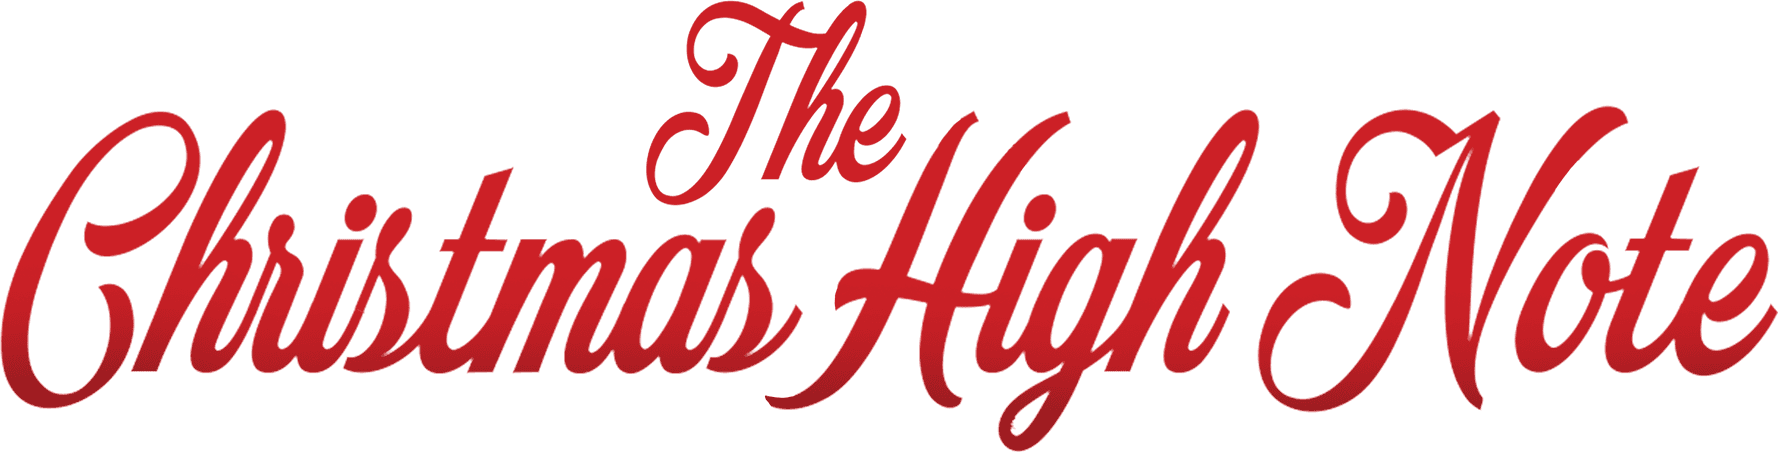 The Christmas High Note logo